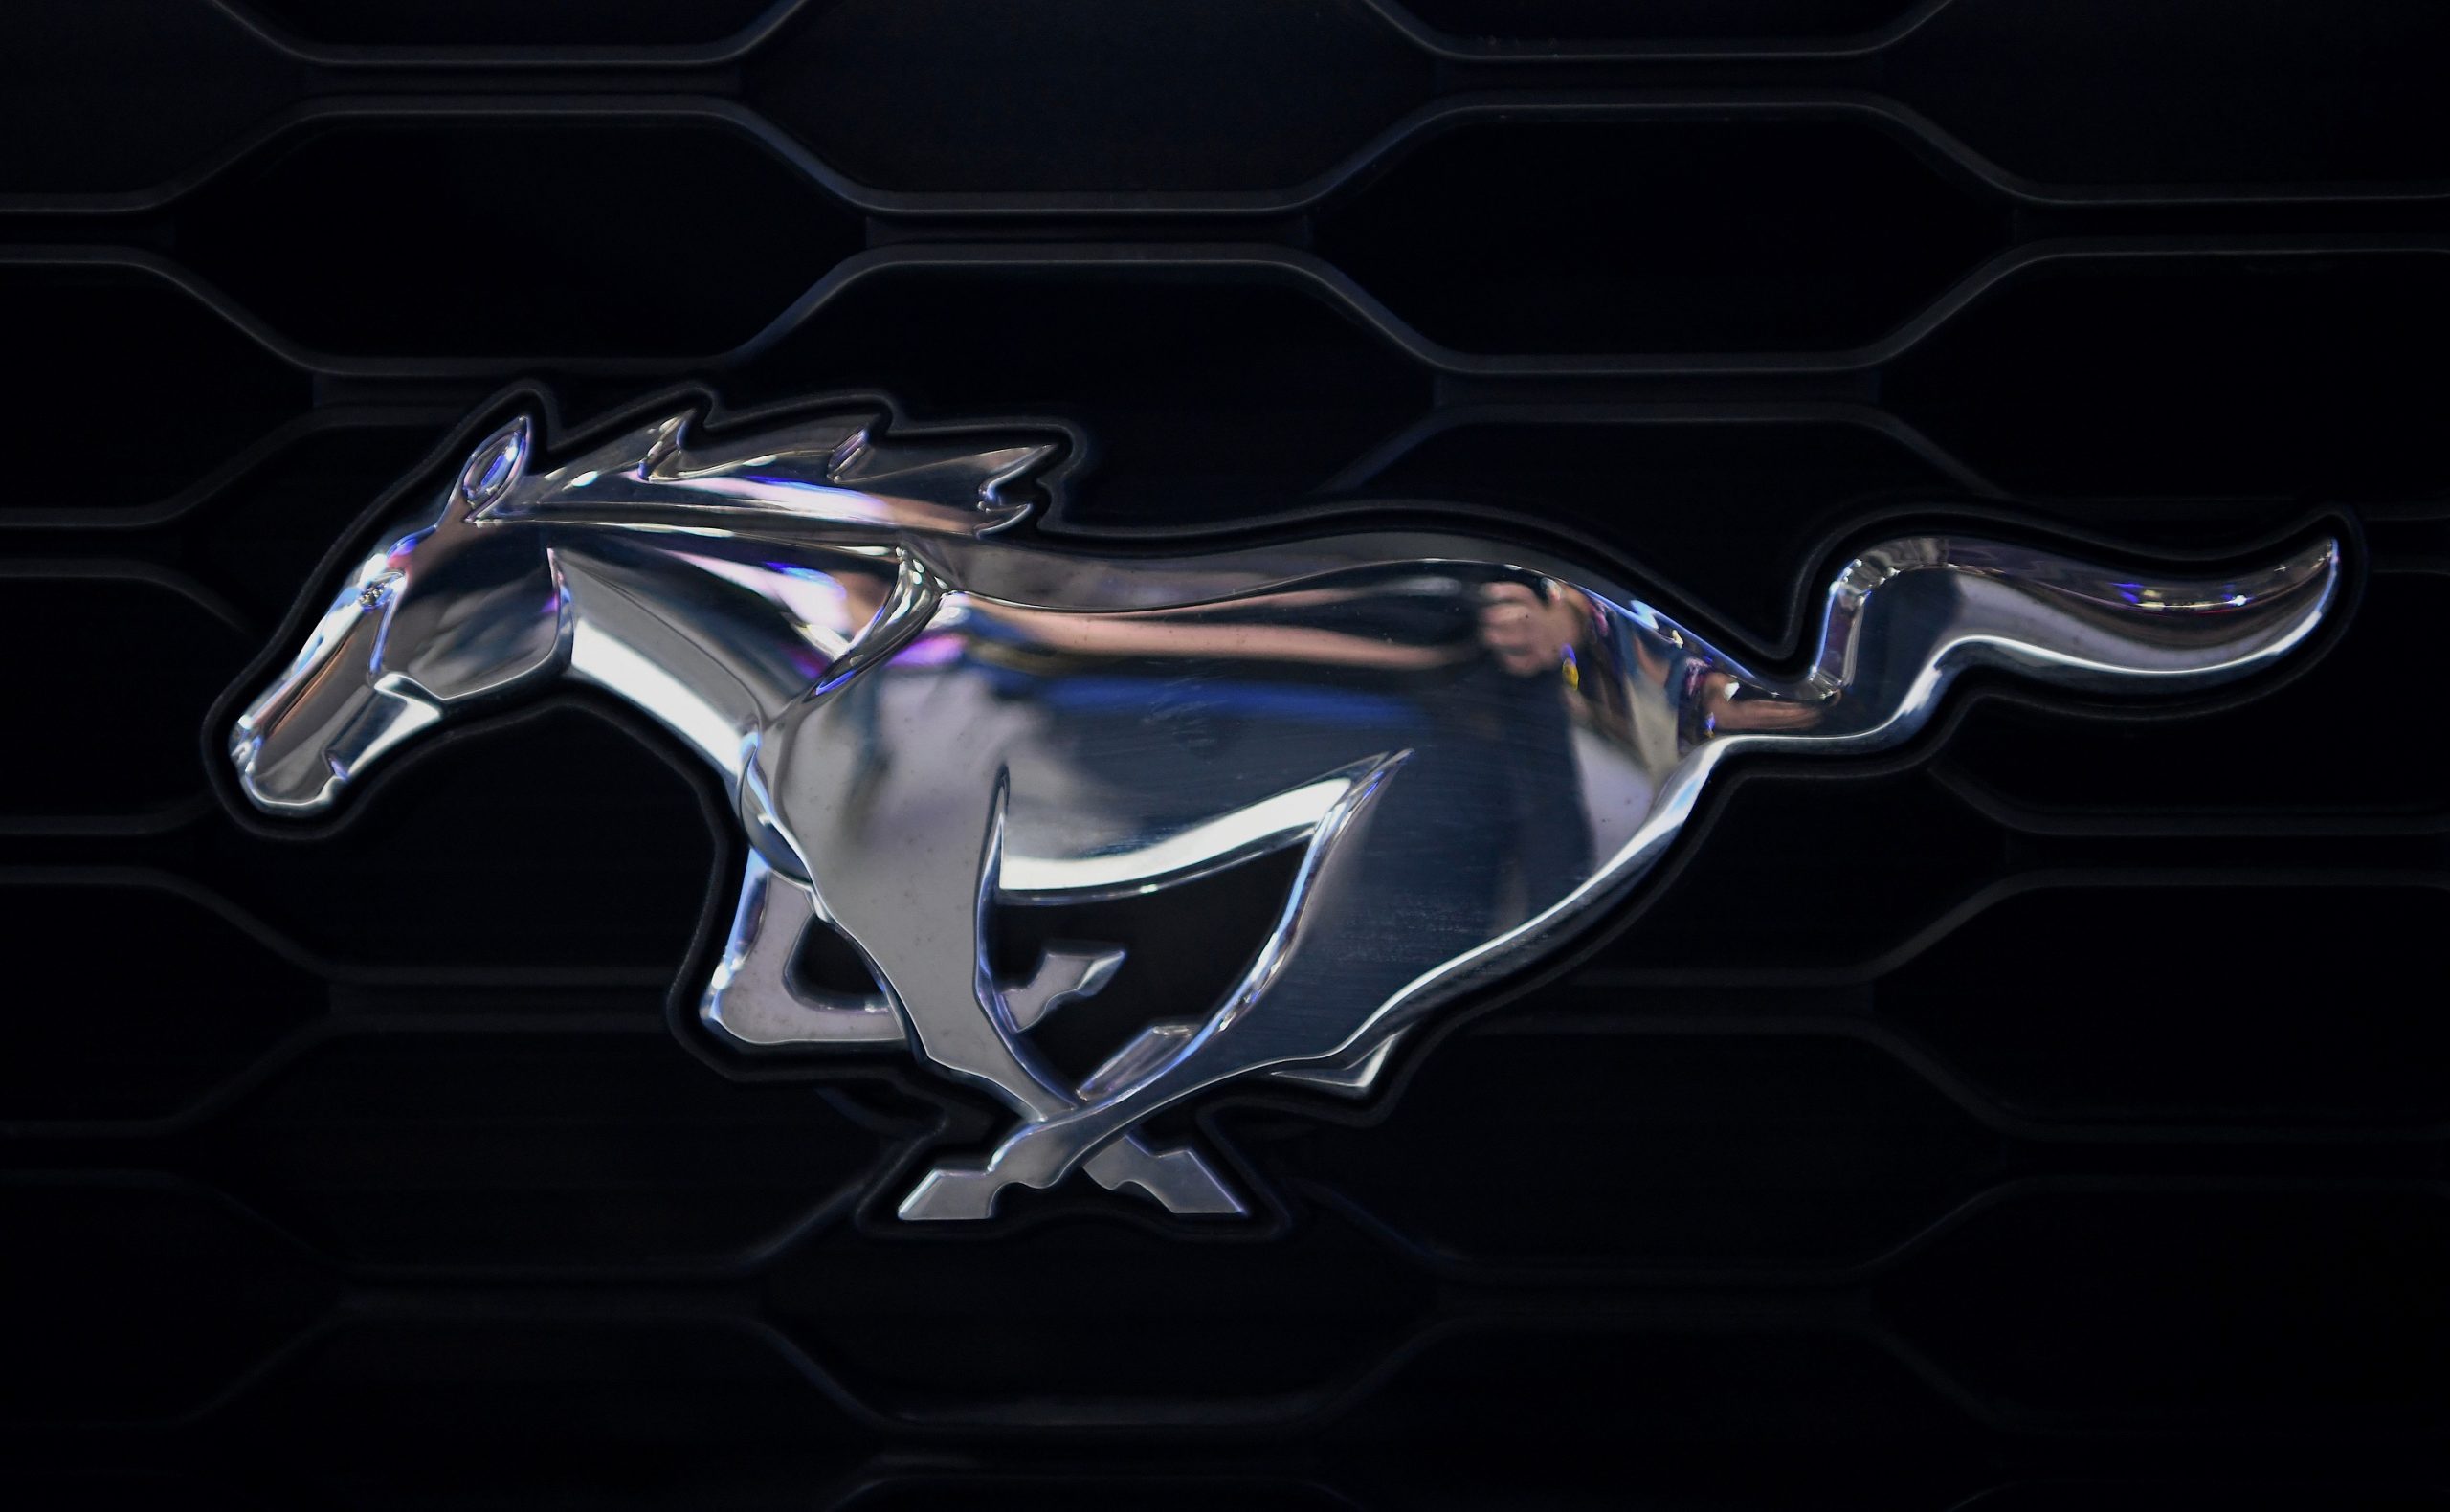 The Mustang badge